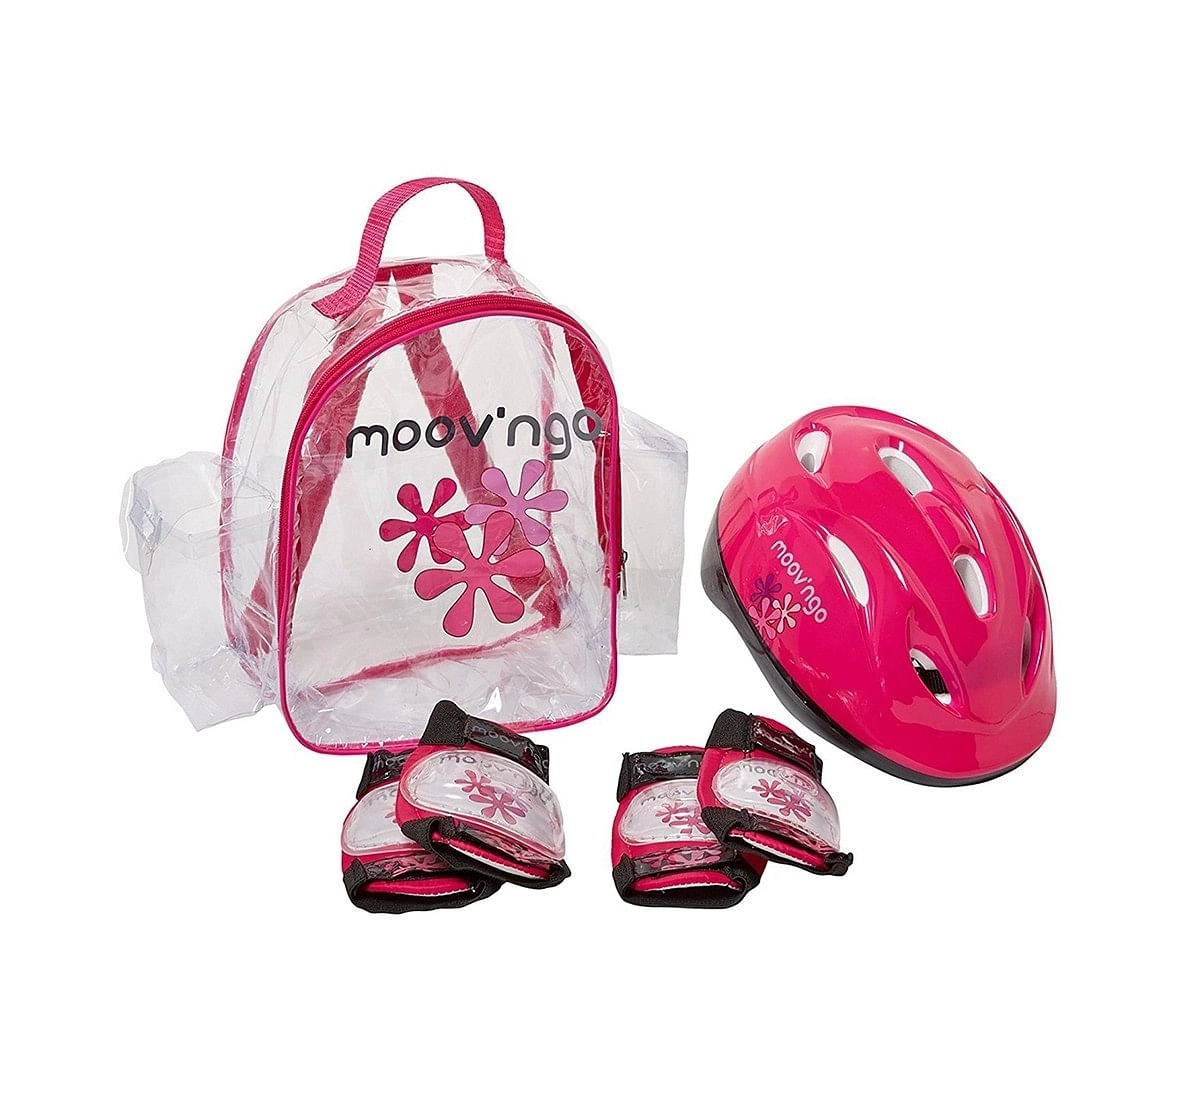 Moov'Ngo Protection Set (Blue/Pink) Ball Sports & Accessories for Kids age 3Y+ 